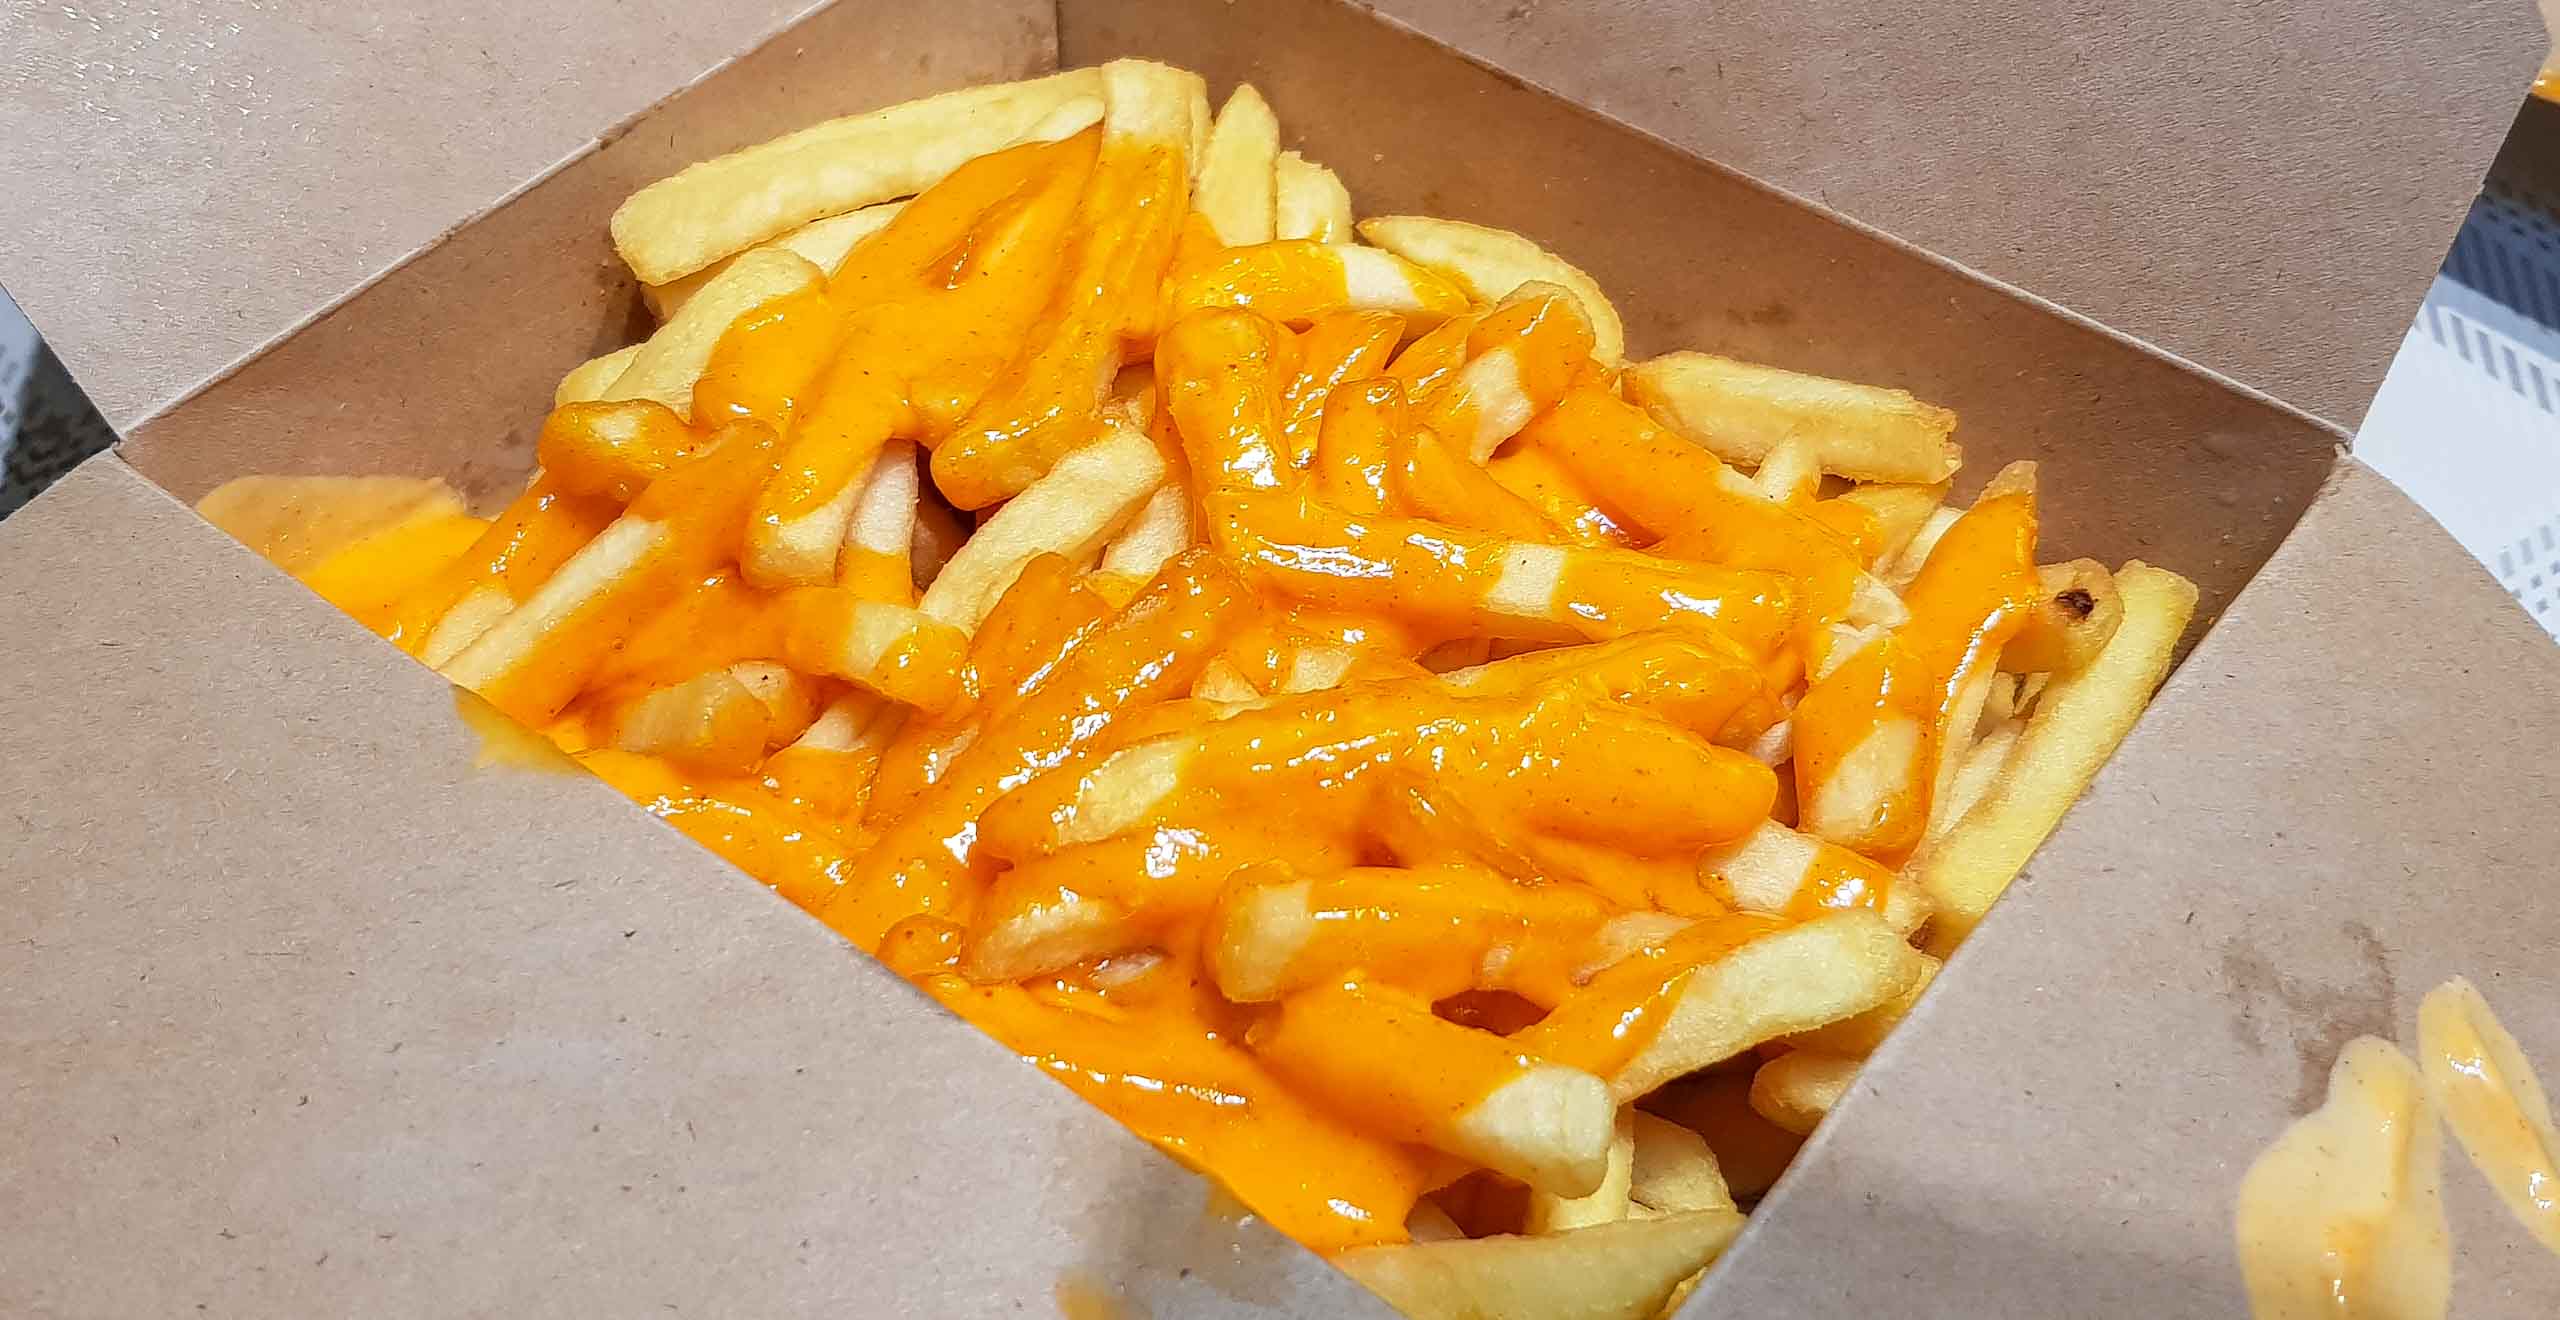 Appearance of Peck & Yard's Crazee Fries with Korean Mayo Sauce